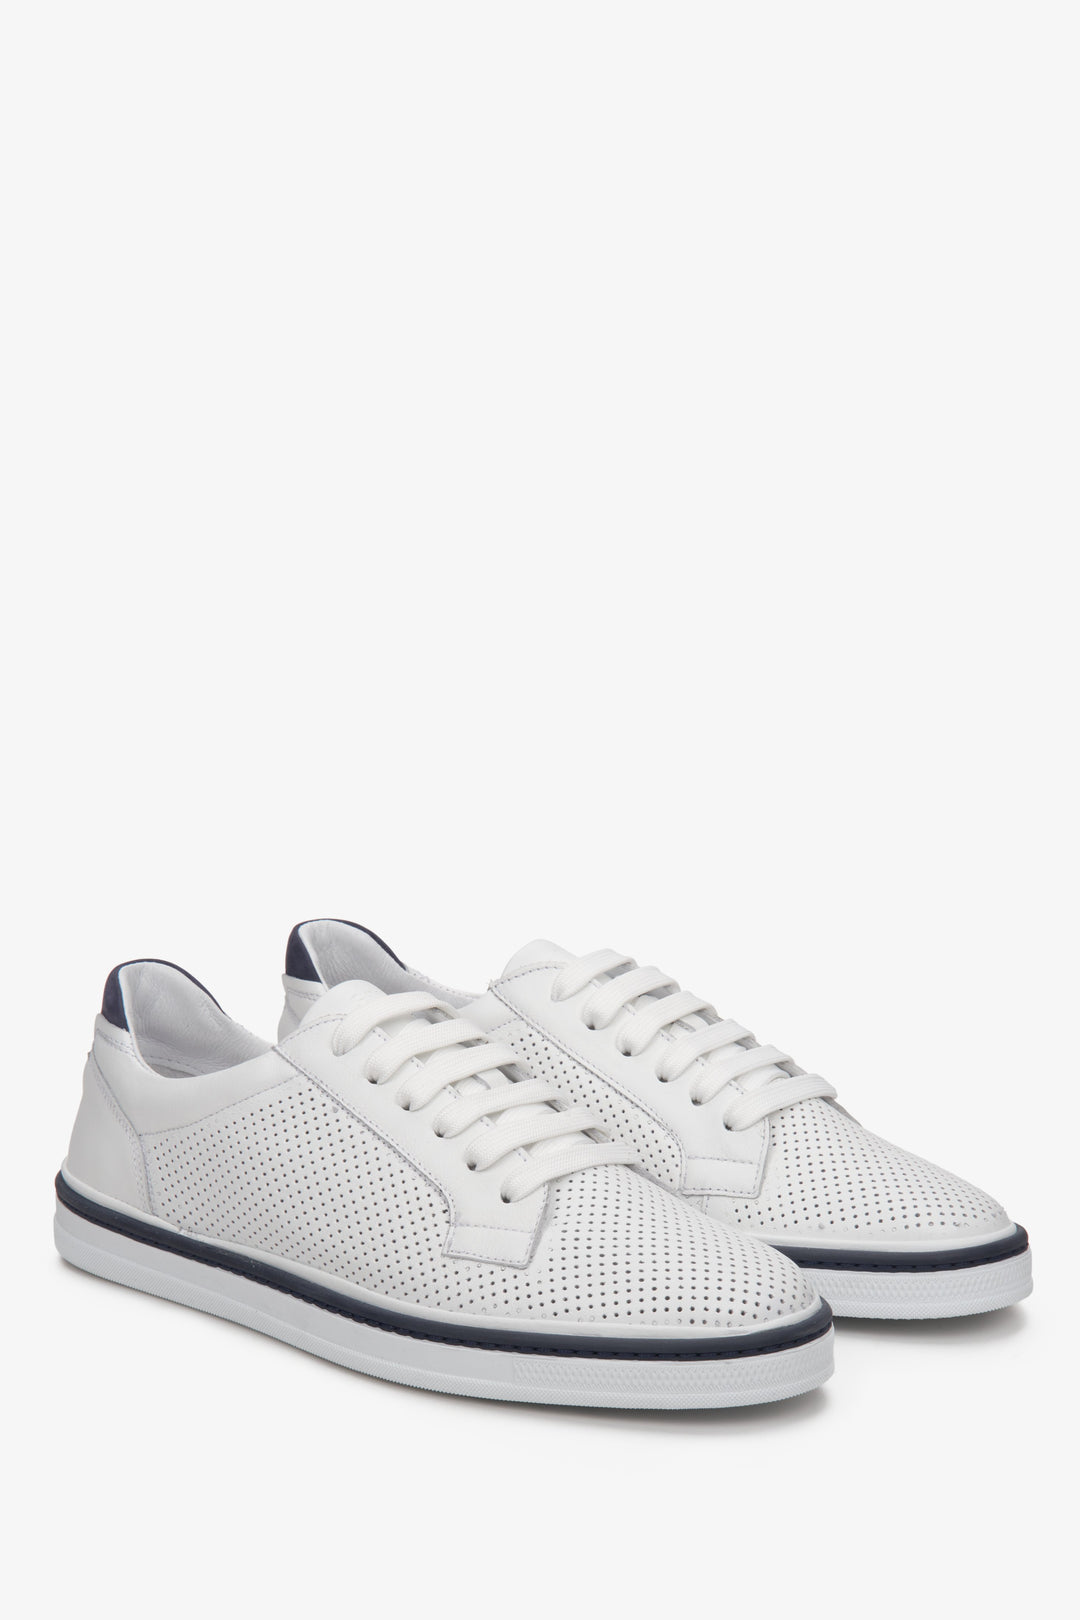 Men's white sneakers with perforations and lacing - Estro brand model for the summer.